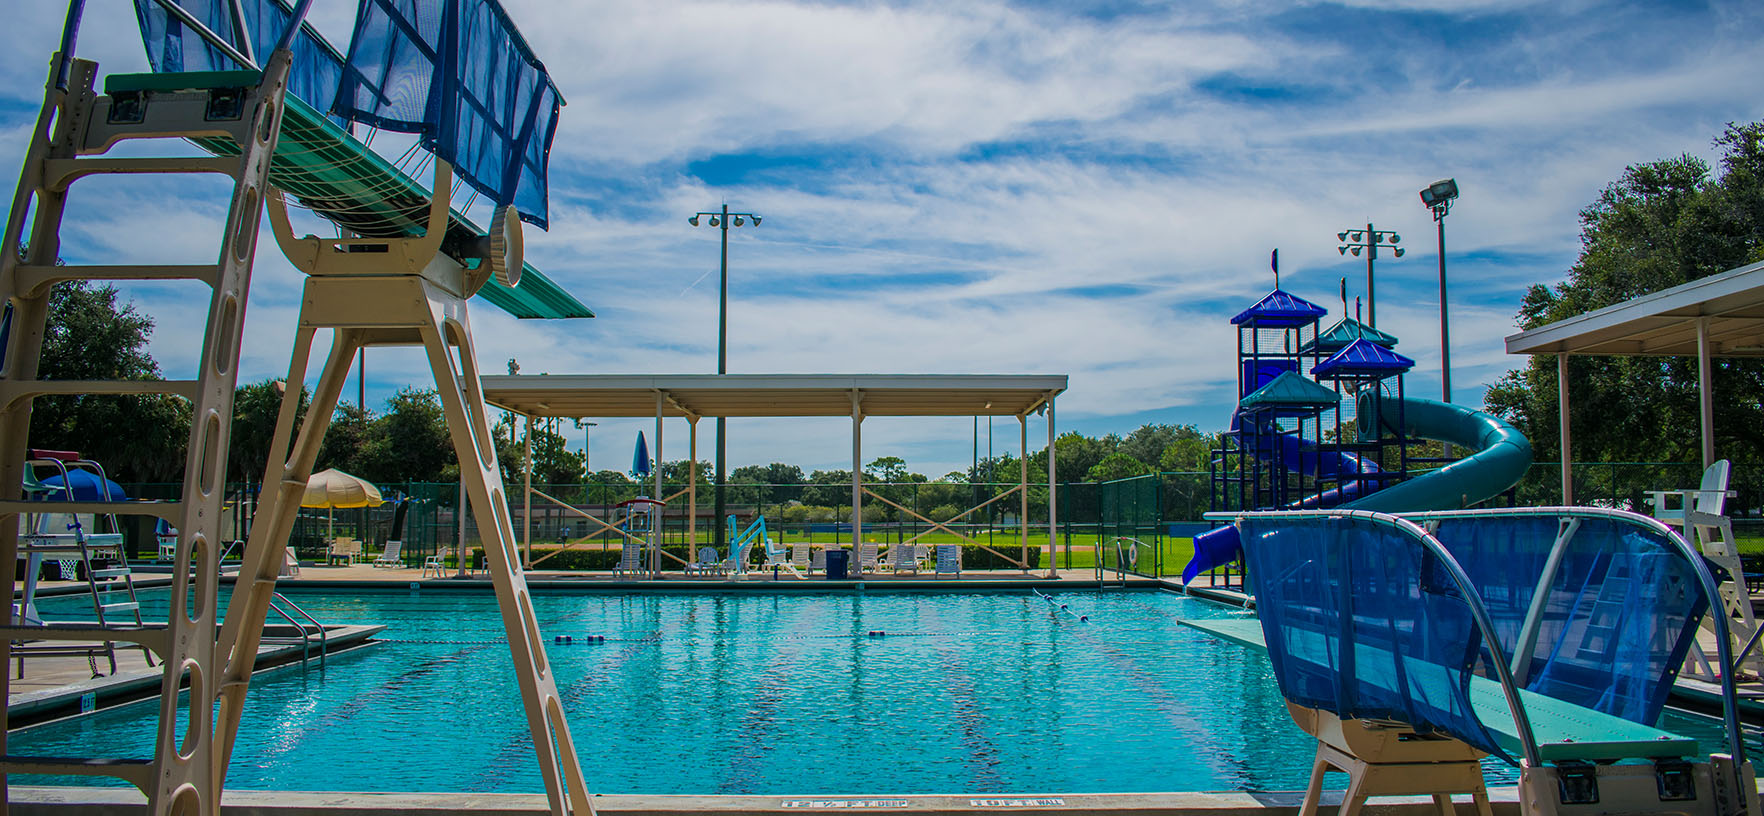 Fossil Park Pool Diving Boards